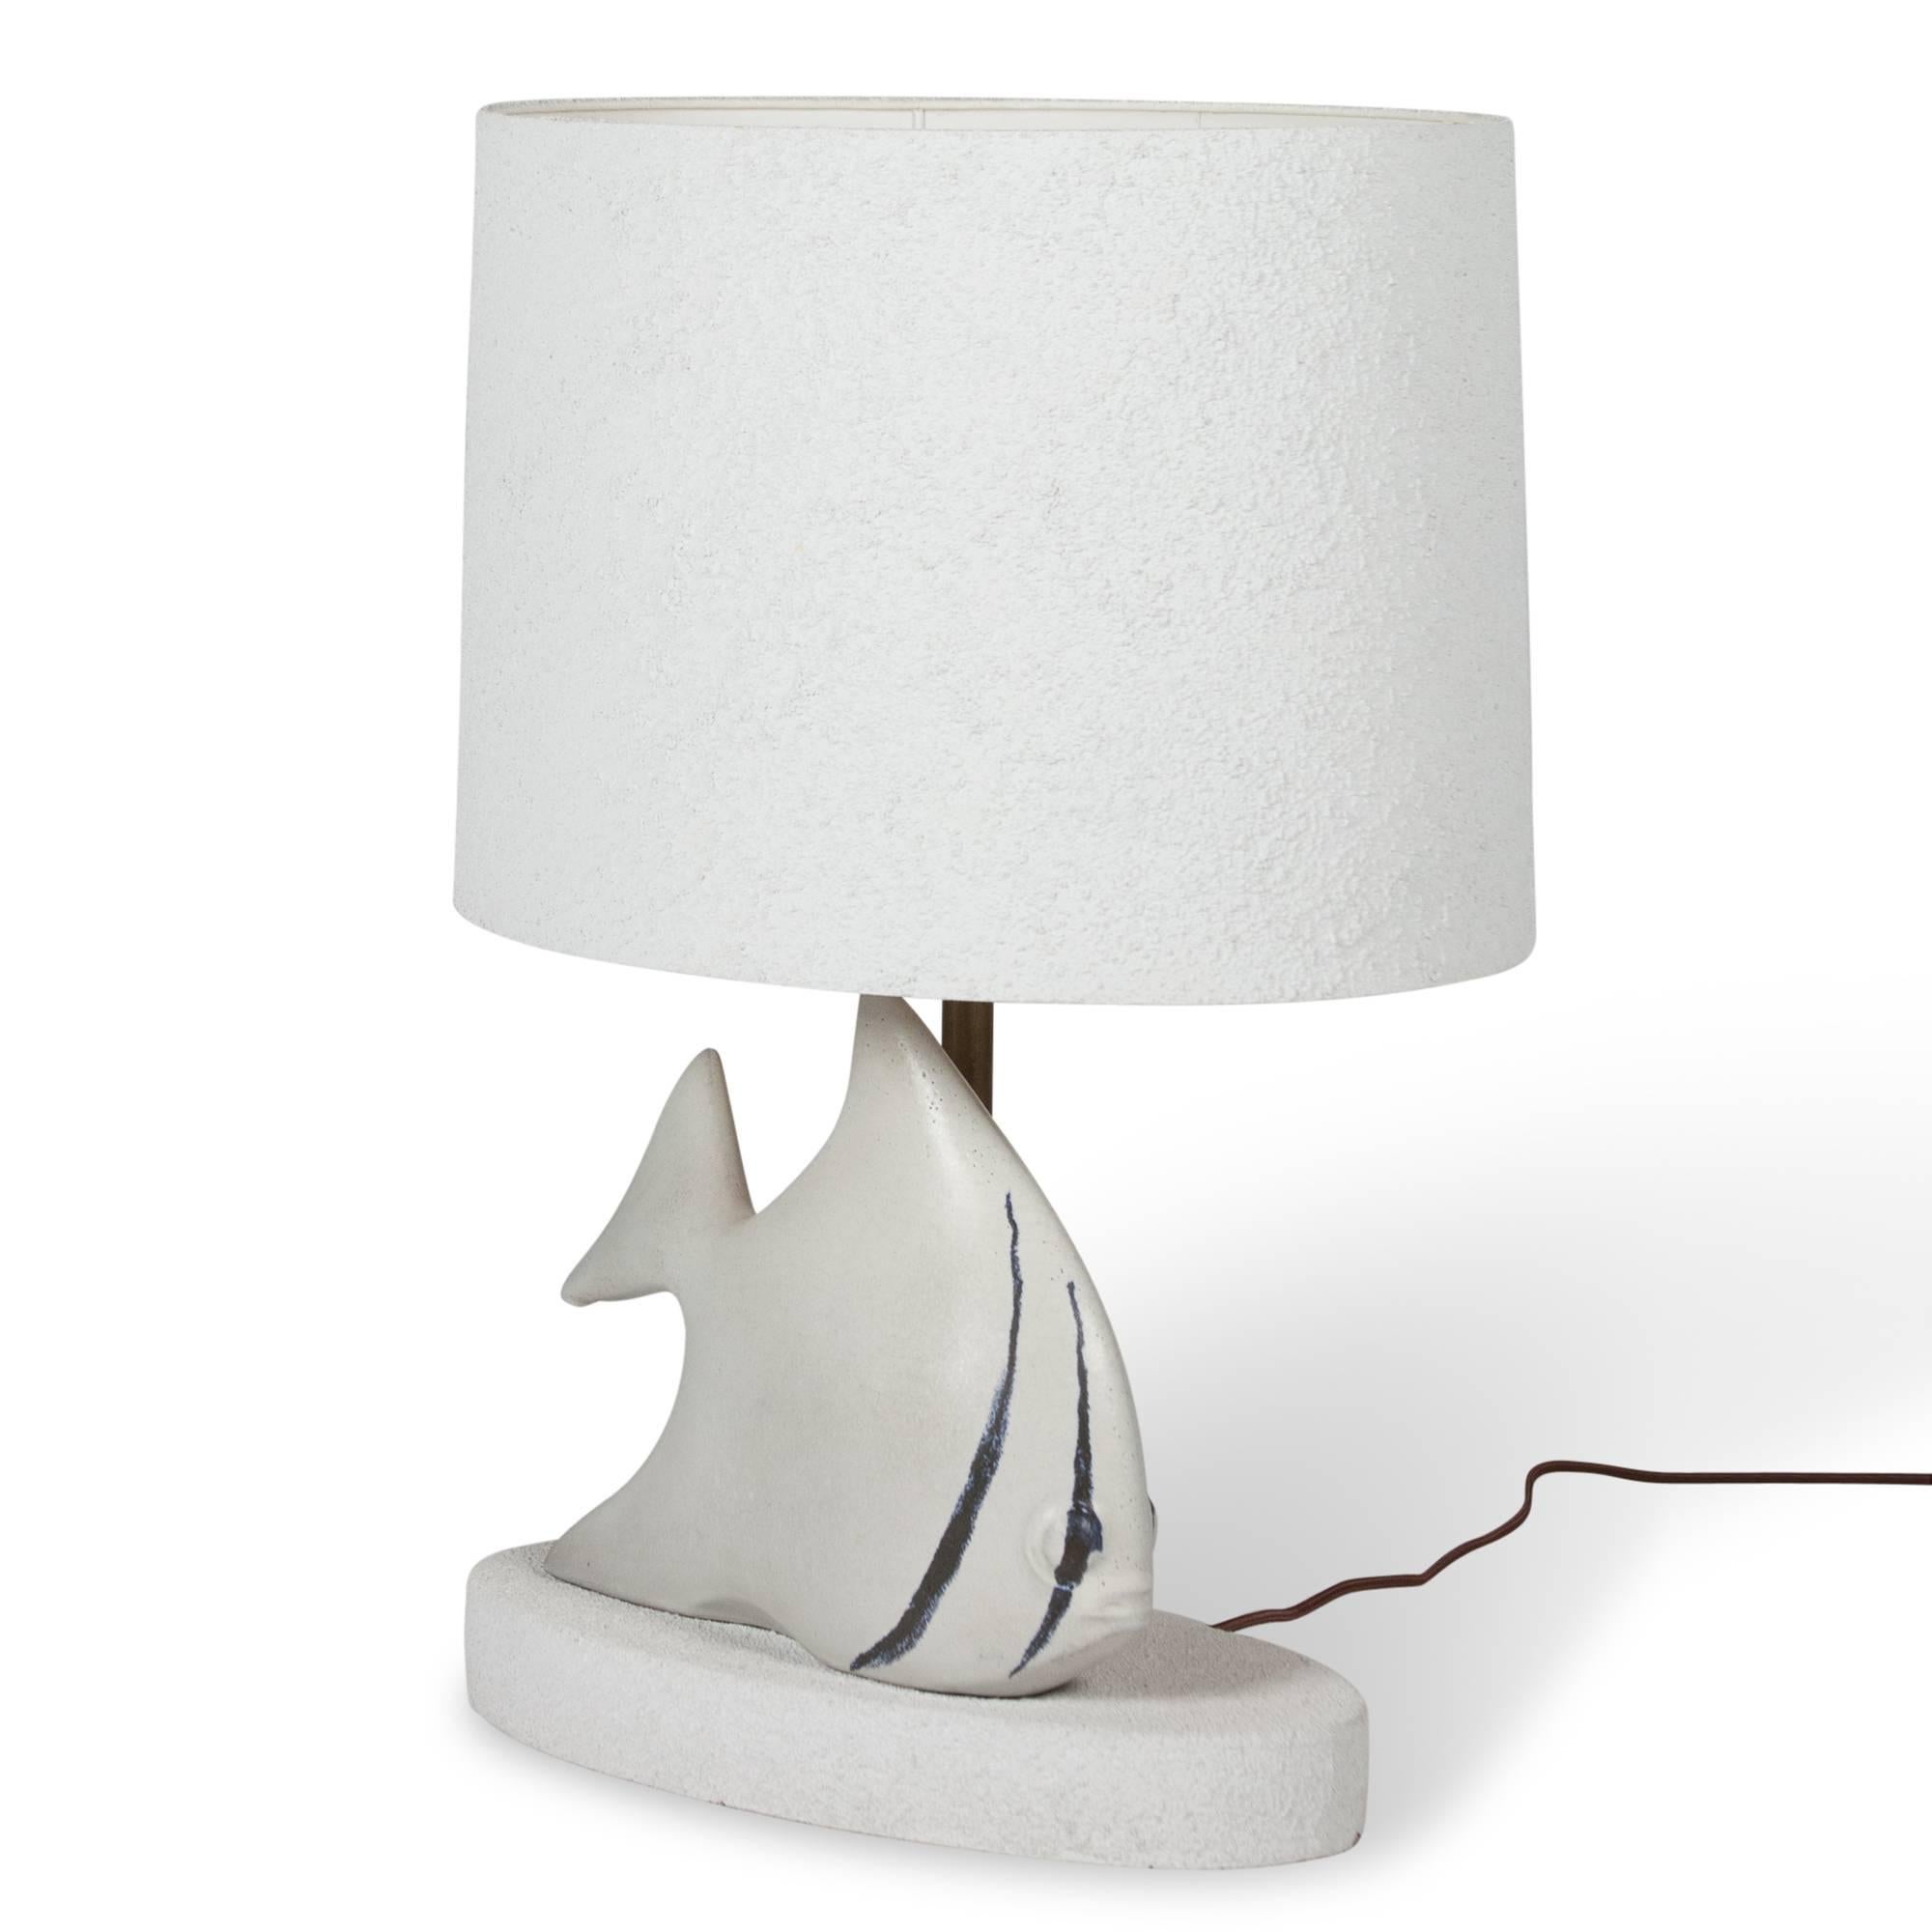 Single studio ceramic table lamp, the base modeled as an angelfish. In textured paper shade by Mariana Van Alesh, American late 1940s. Measures: 14 in W, 7 in D, 23 1/2 in H. Signed. 